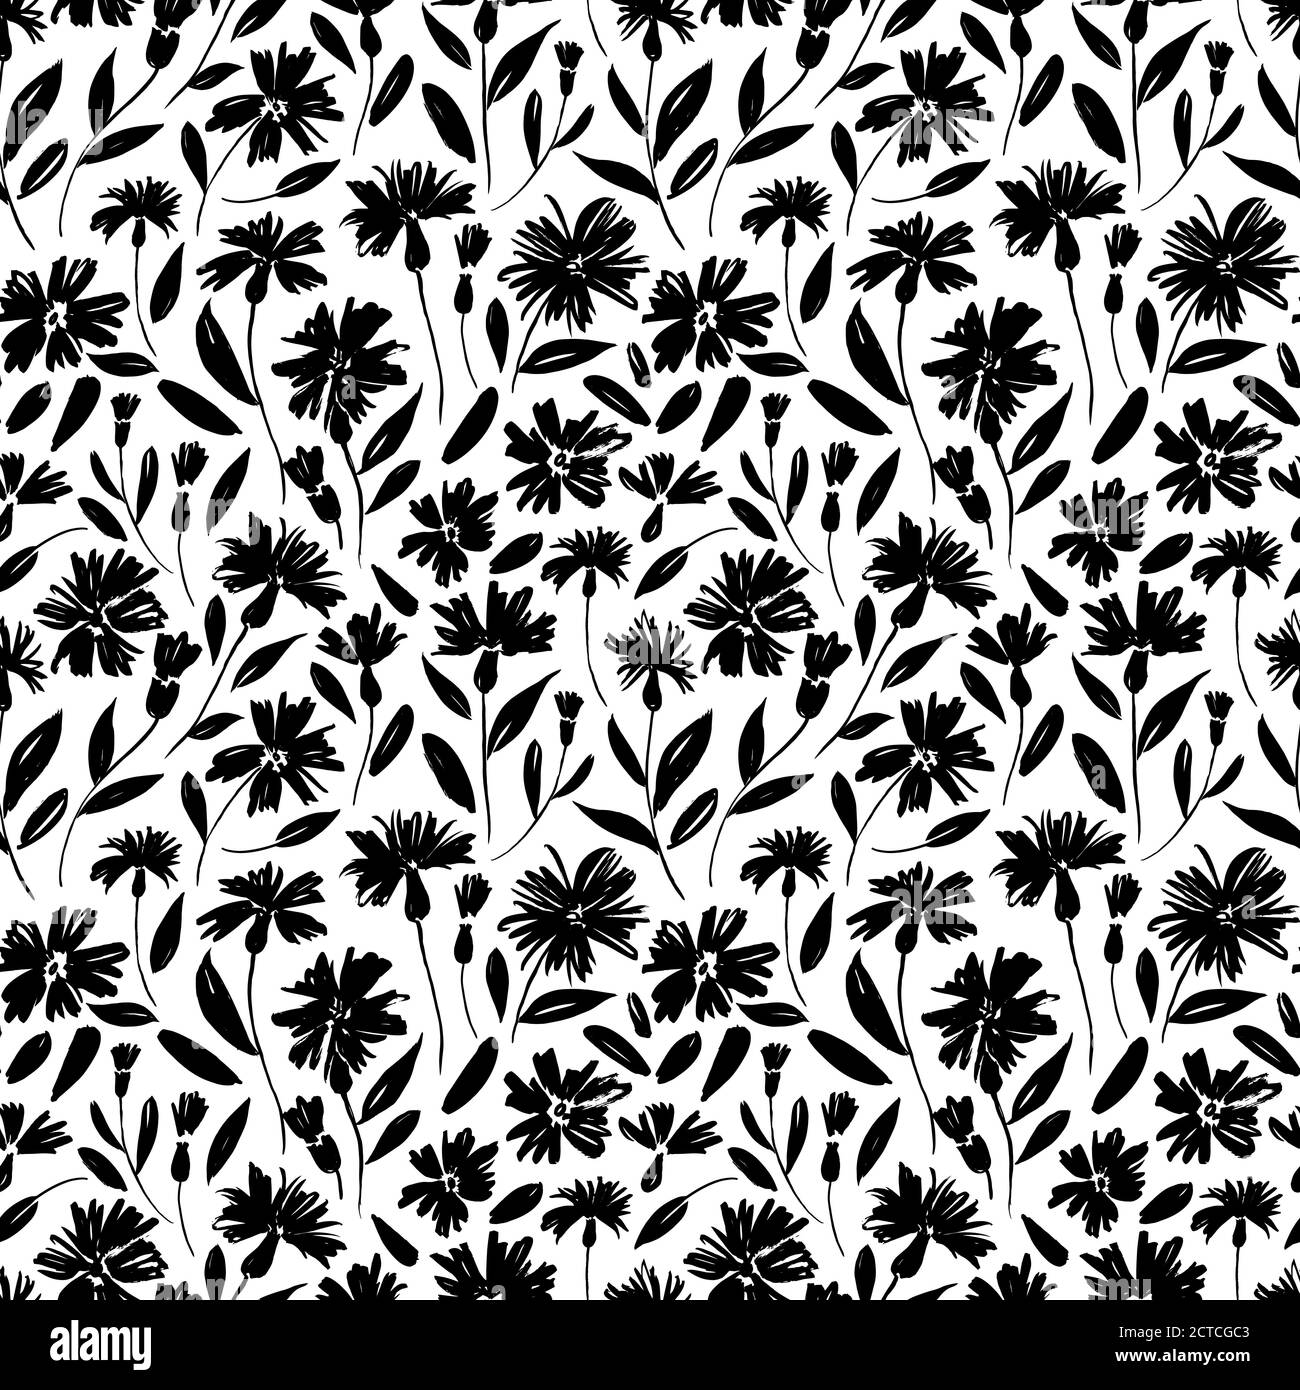 Black flowers with stems vector seamless pattern. Stock Vector